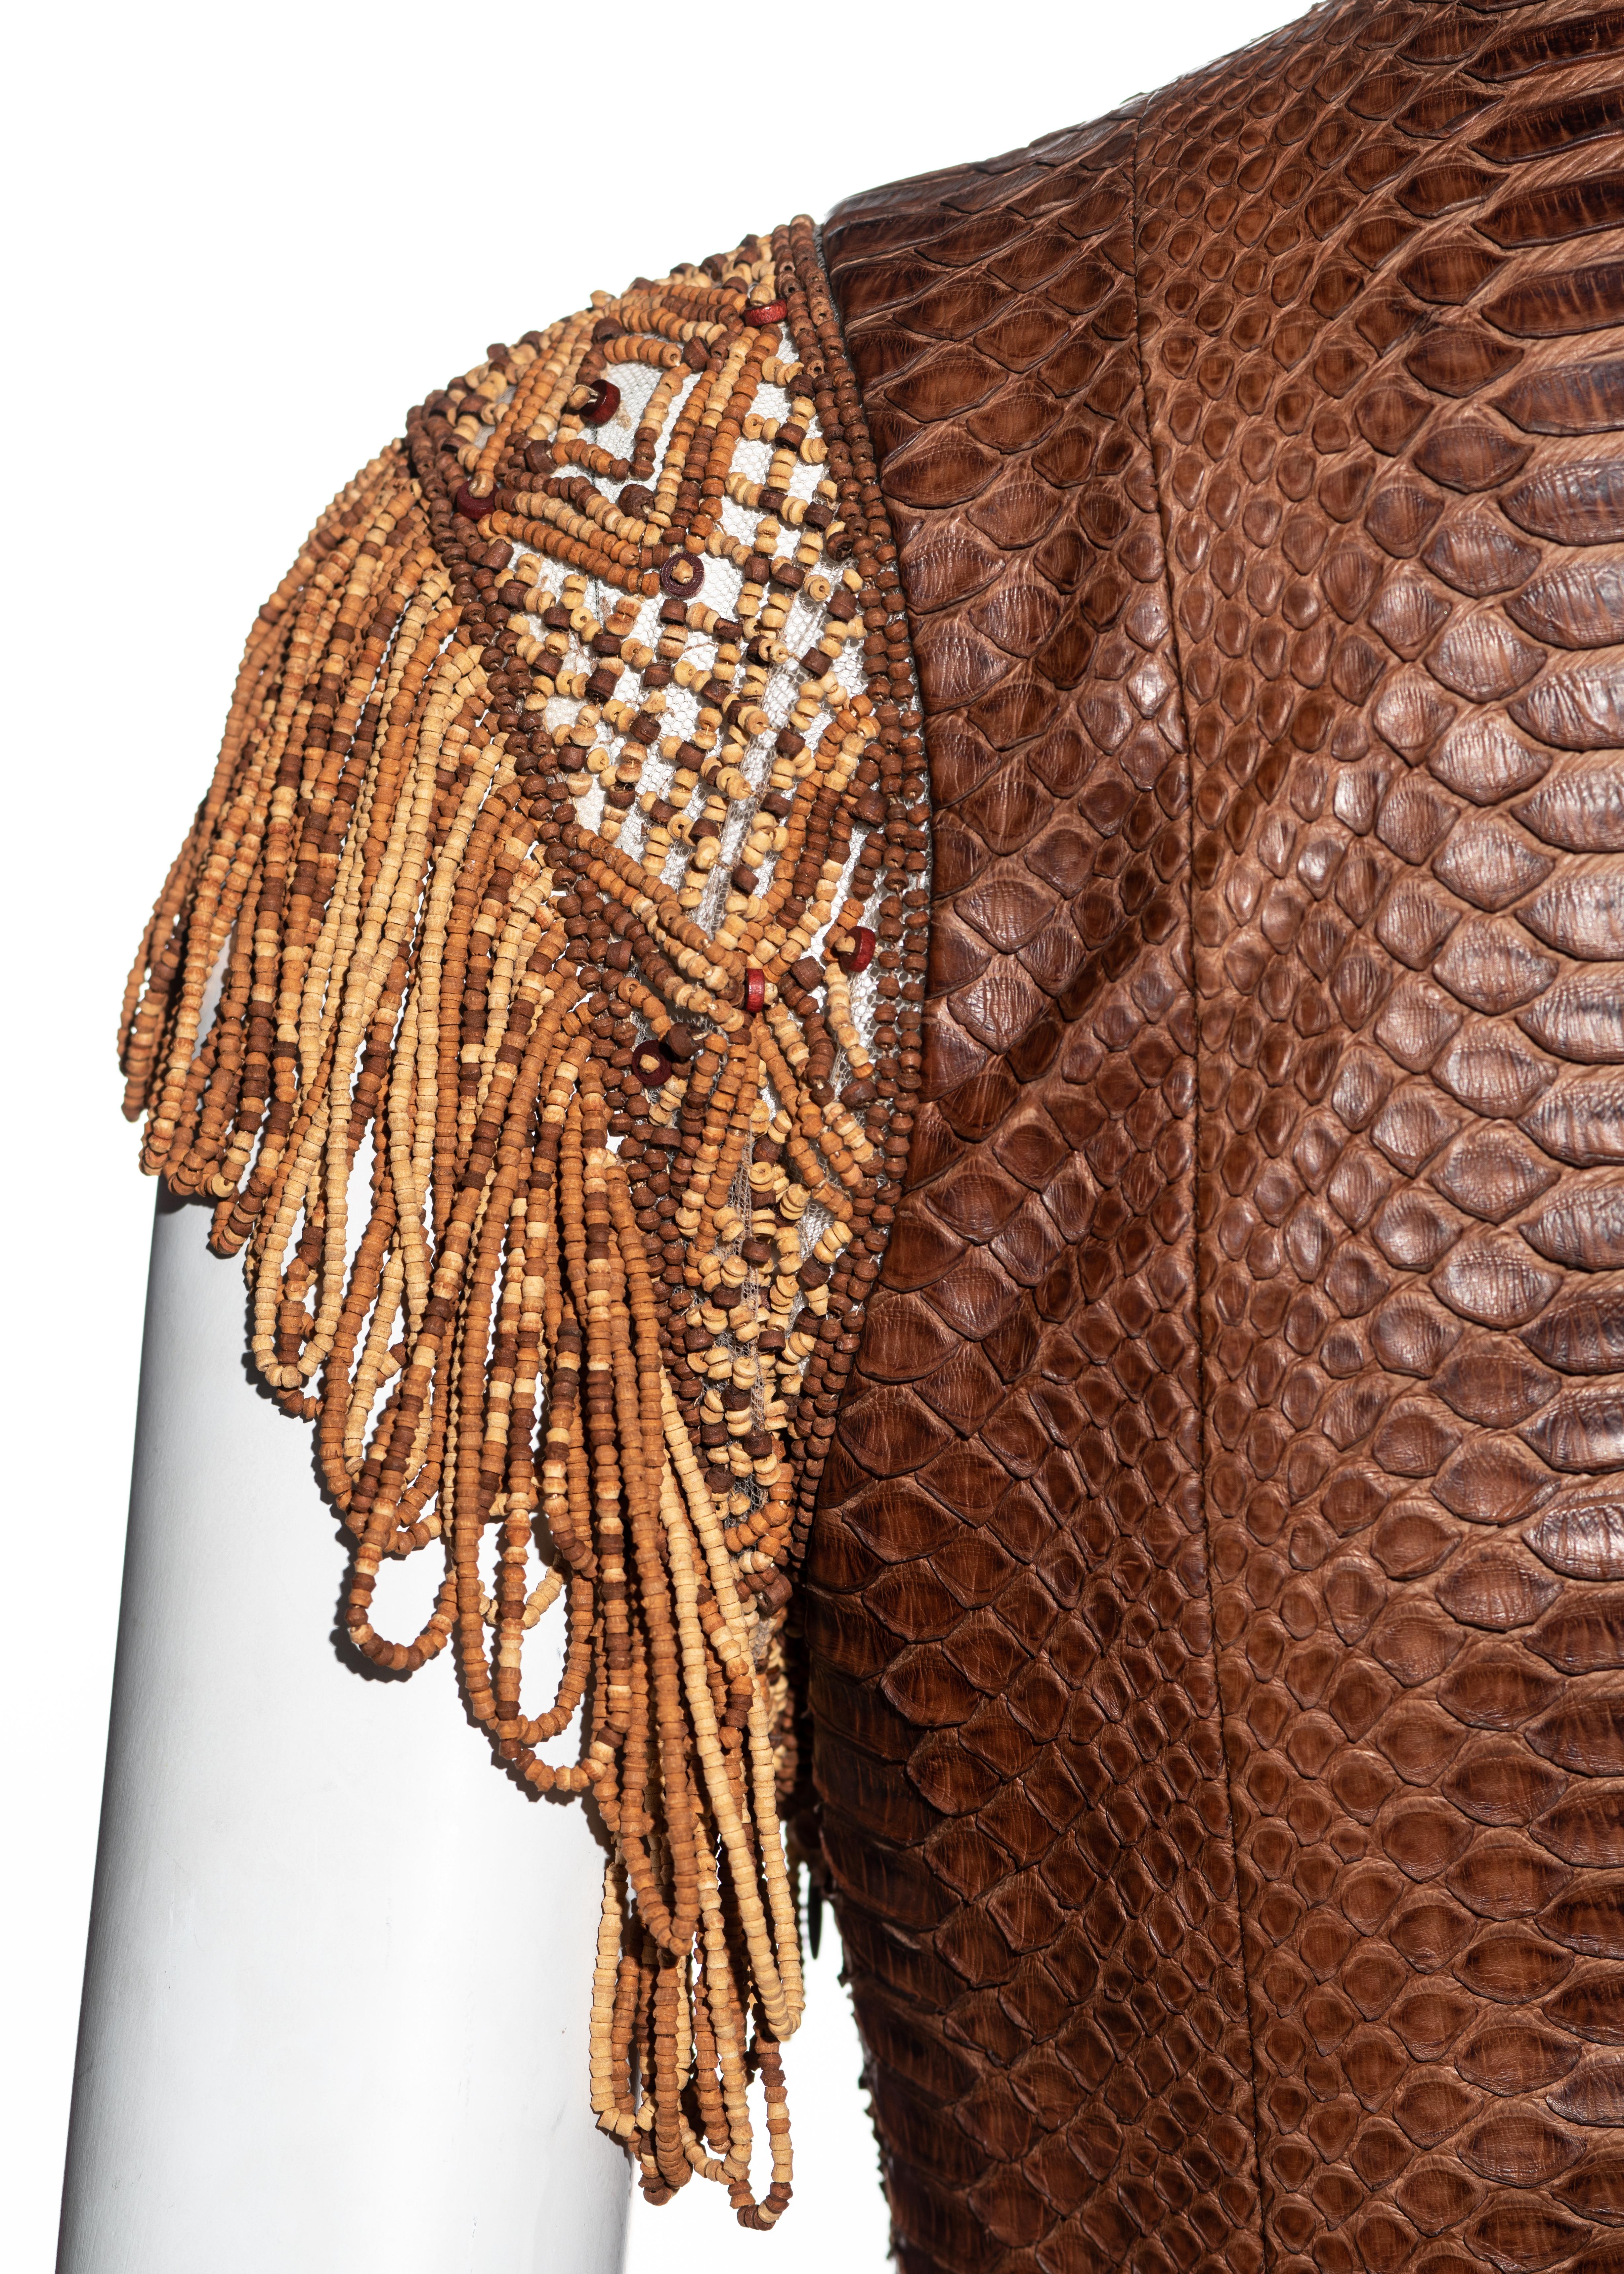 Givenchy by Alexander McQueen Haute Couture brown snakeskin dress, ss 2001 1